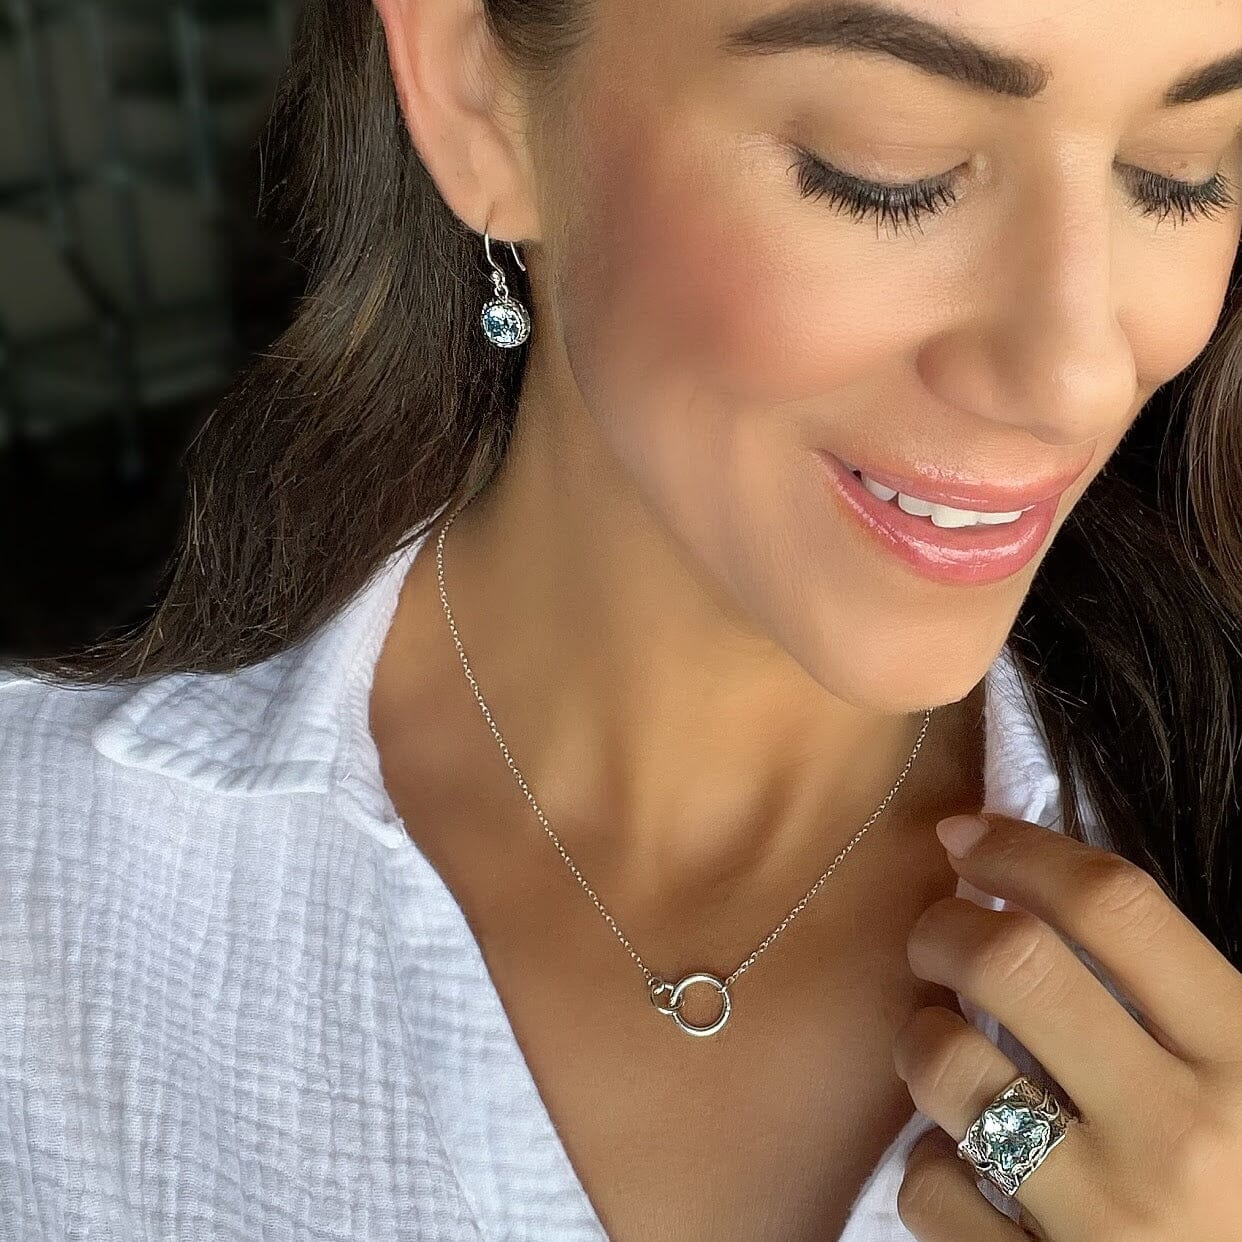 Cruising Earrings paired with It Takes Two Necklace and She's a Natural blue topaz Ring 